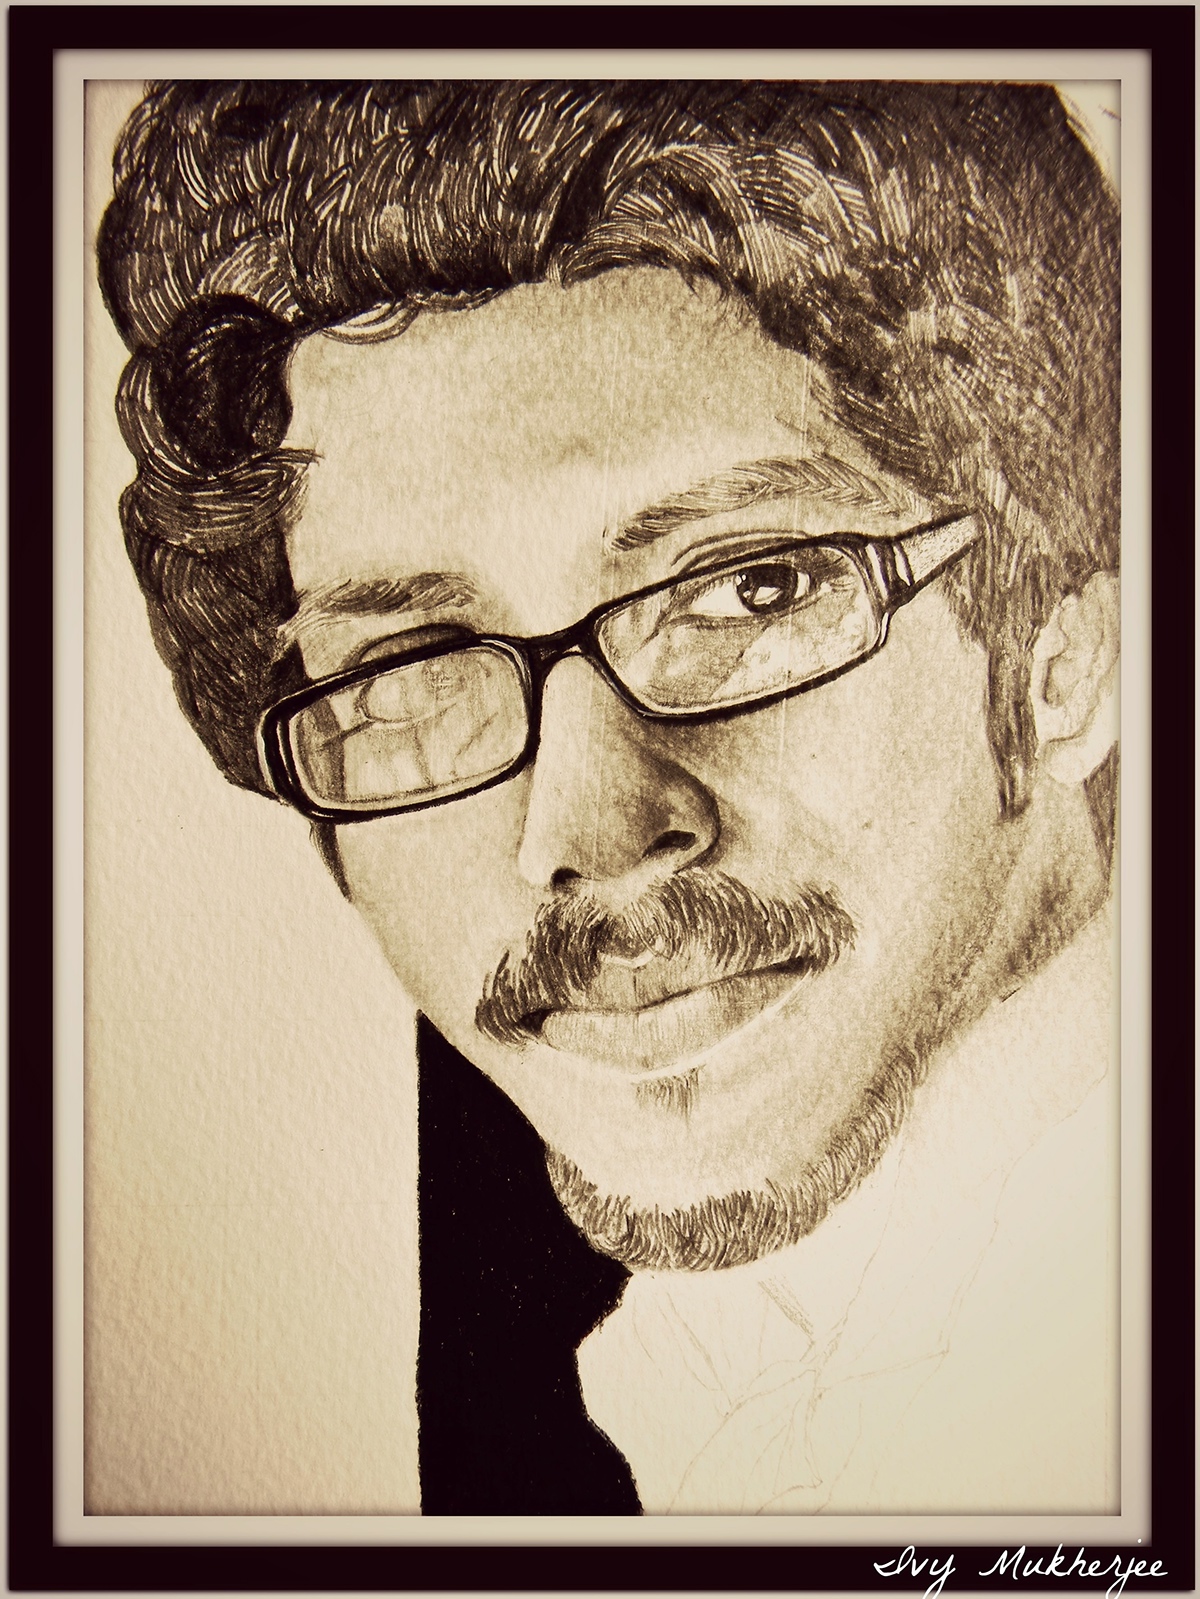 #drawing #portrait #study #realistic #hyperrealistic #drawing #graphitepencil #staedtler #pencildrawing Ps25Under25